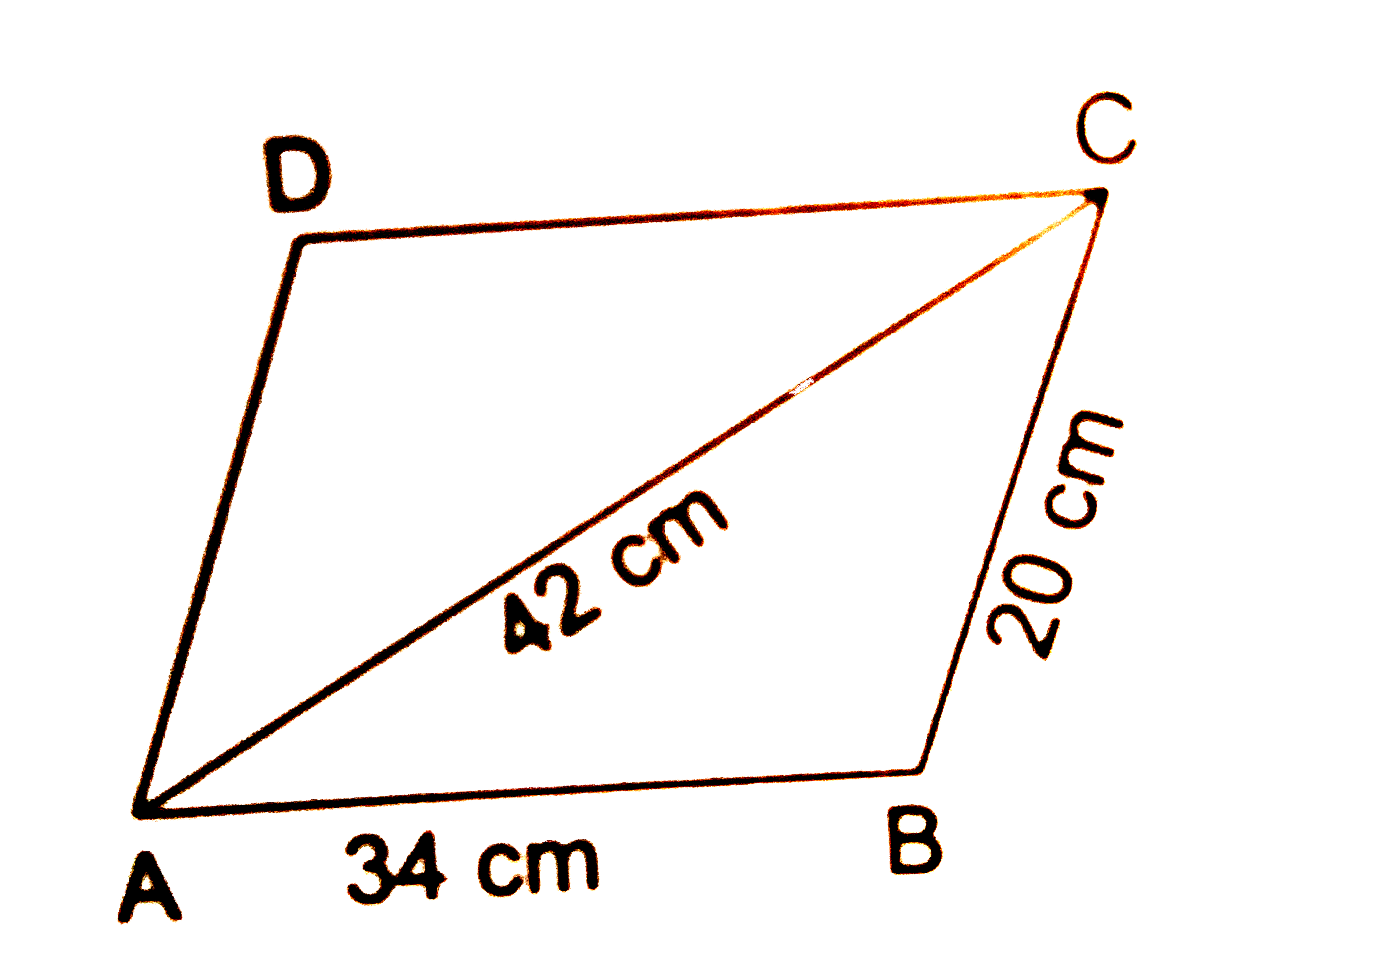 The adjacent sides of a parallelogram ABCD are AB = 34 cm, BC = 20 cm and diagonal AC = 42 cm. Find the area of the parallelogram.